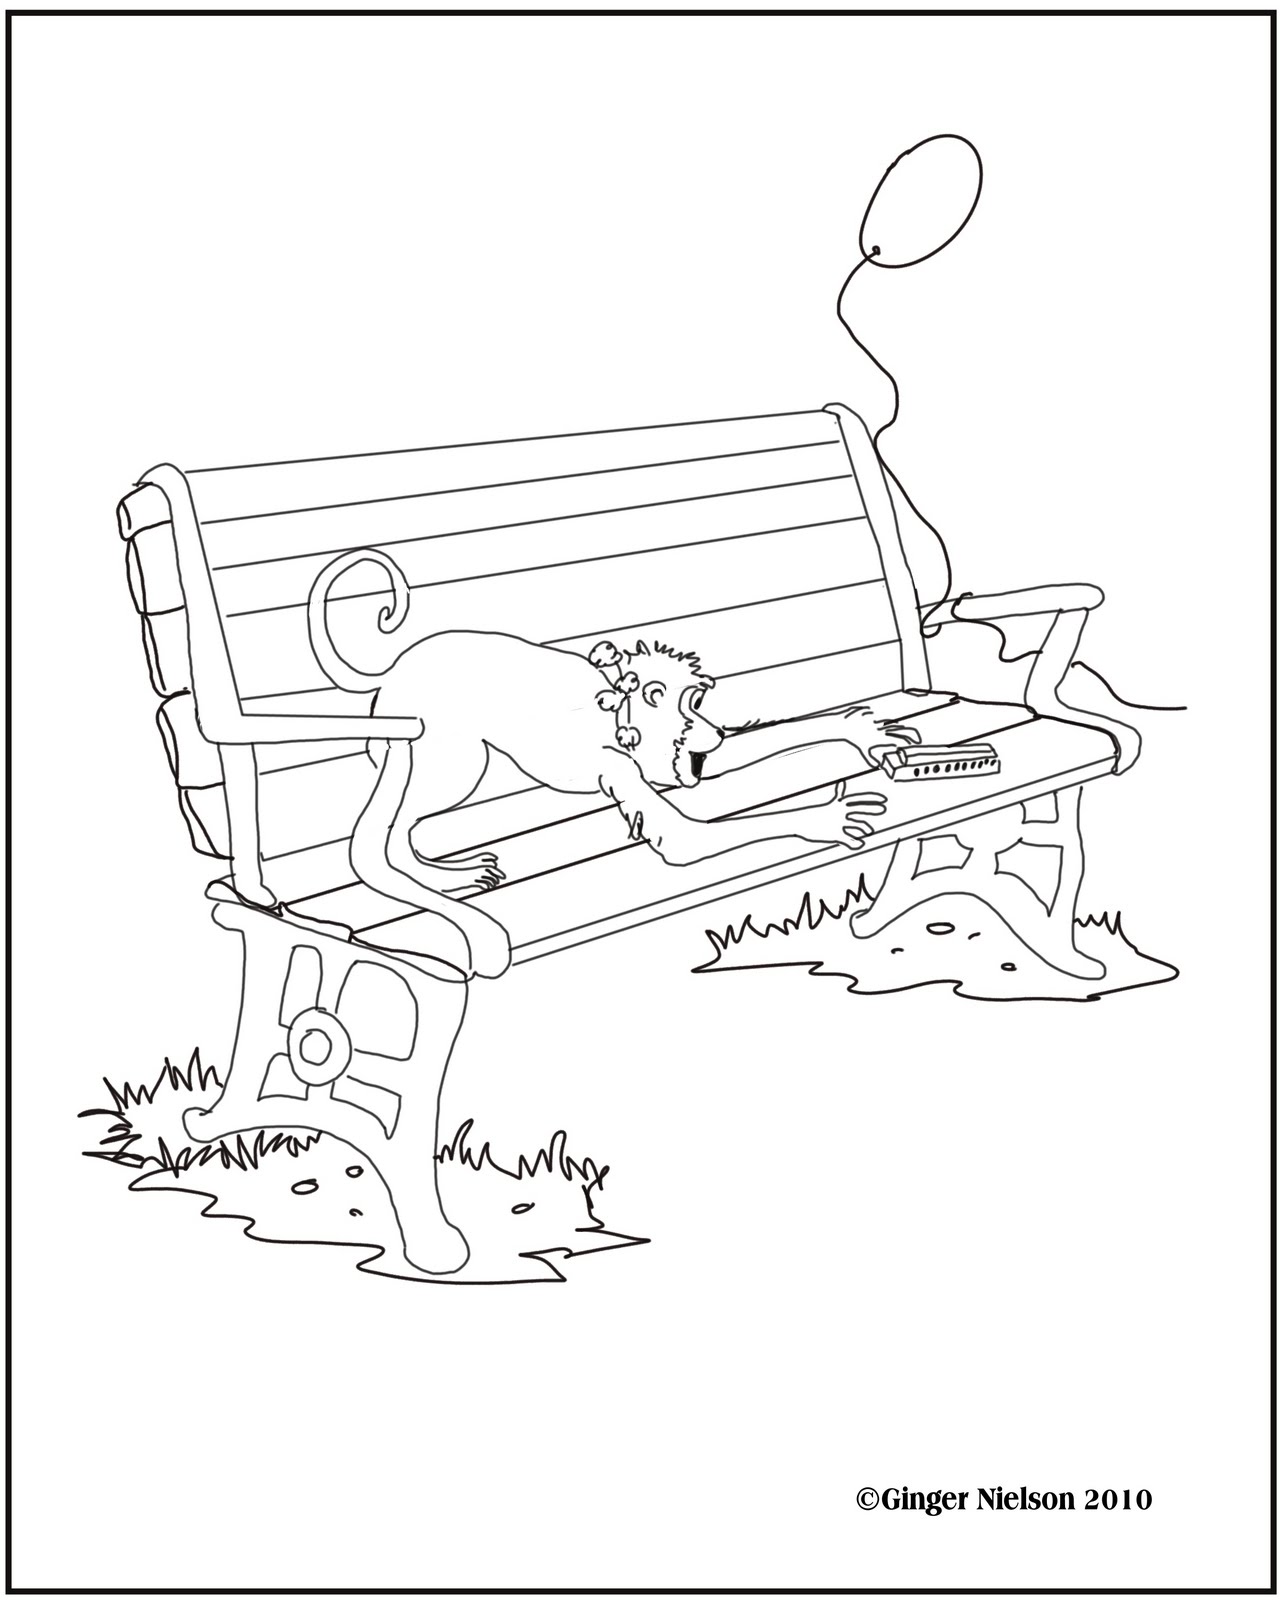 daniel obeyed god coloring pages - photo #20